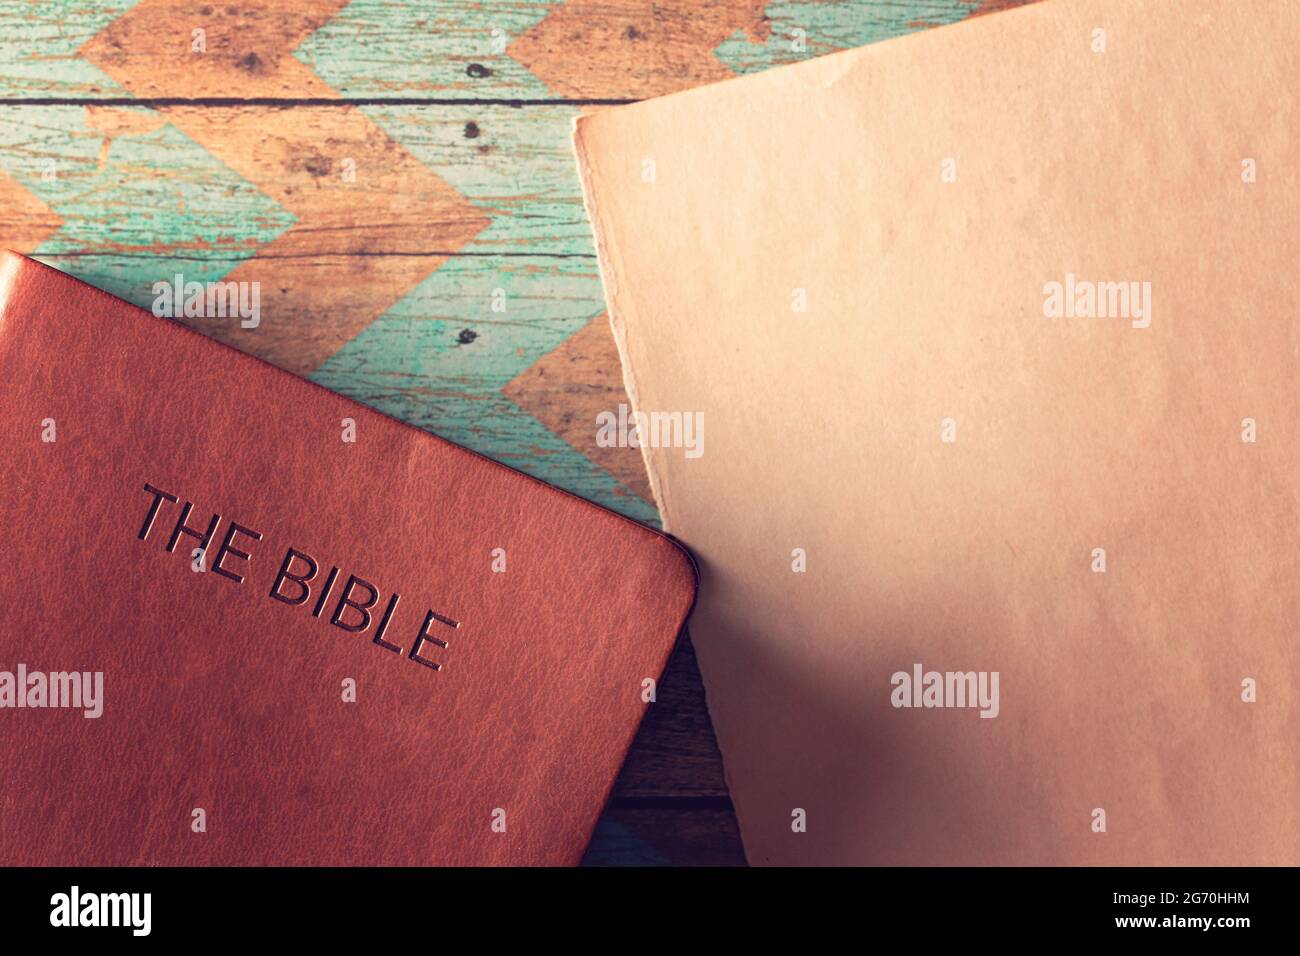 The Holy Bible on a Rustic Wooden Table with a Blank Piece of Antique Paper for Adding Text Stock Photo